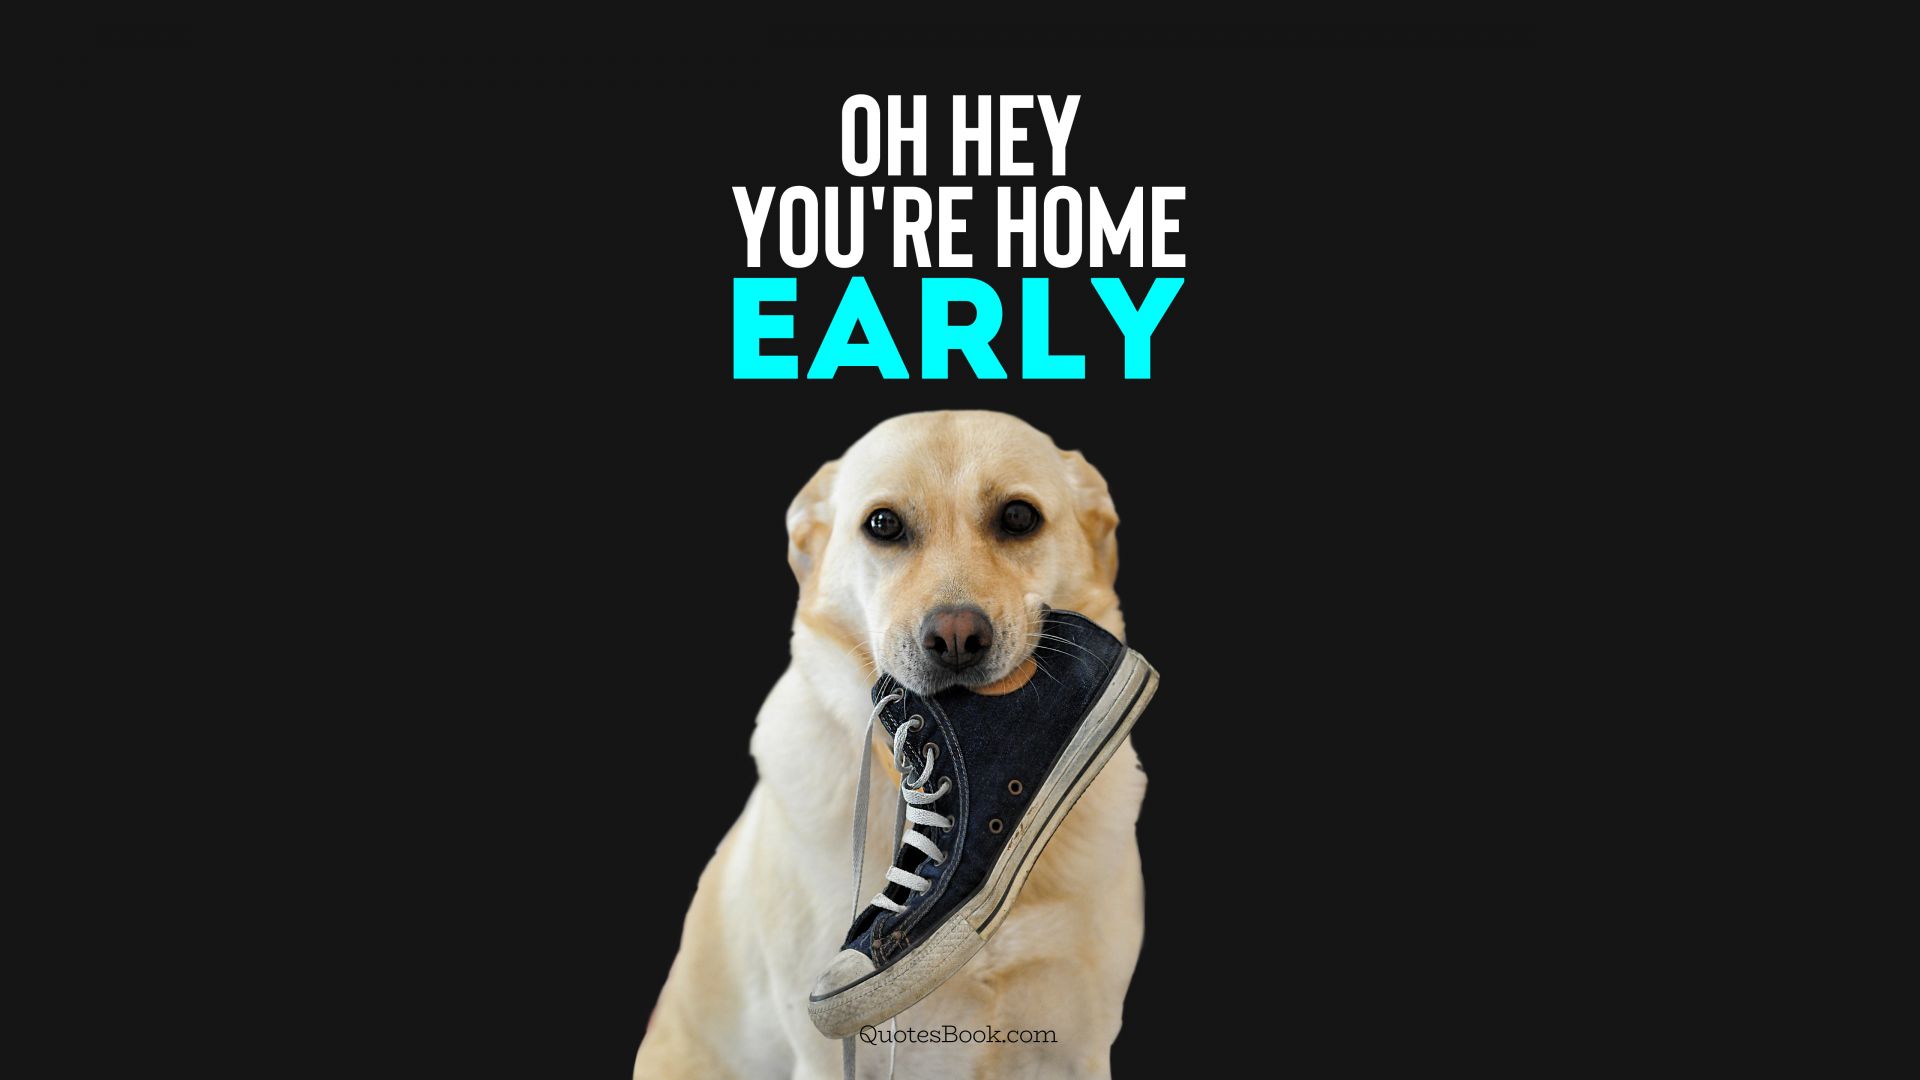 Oh hey you're home early